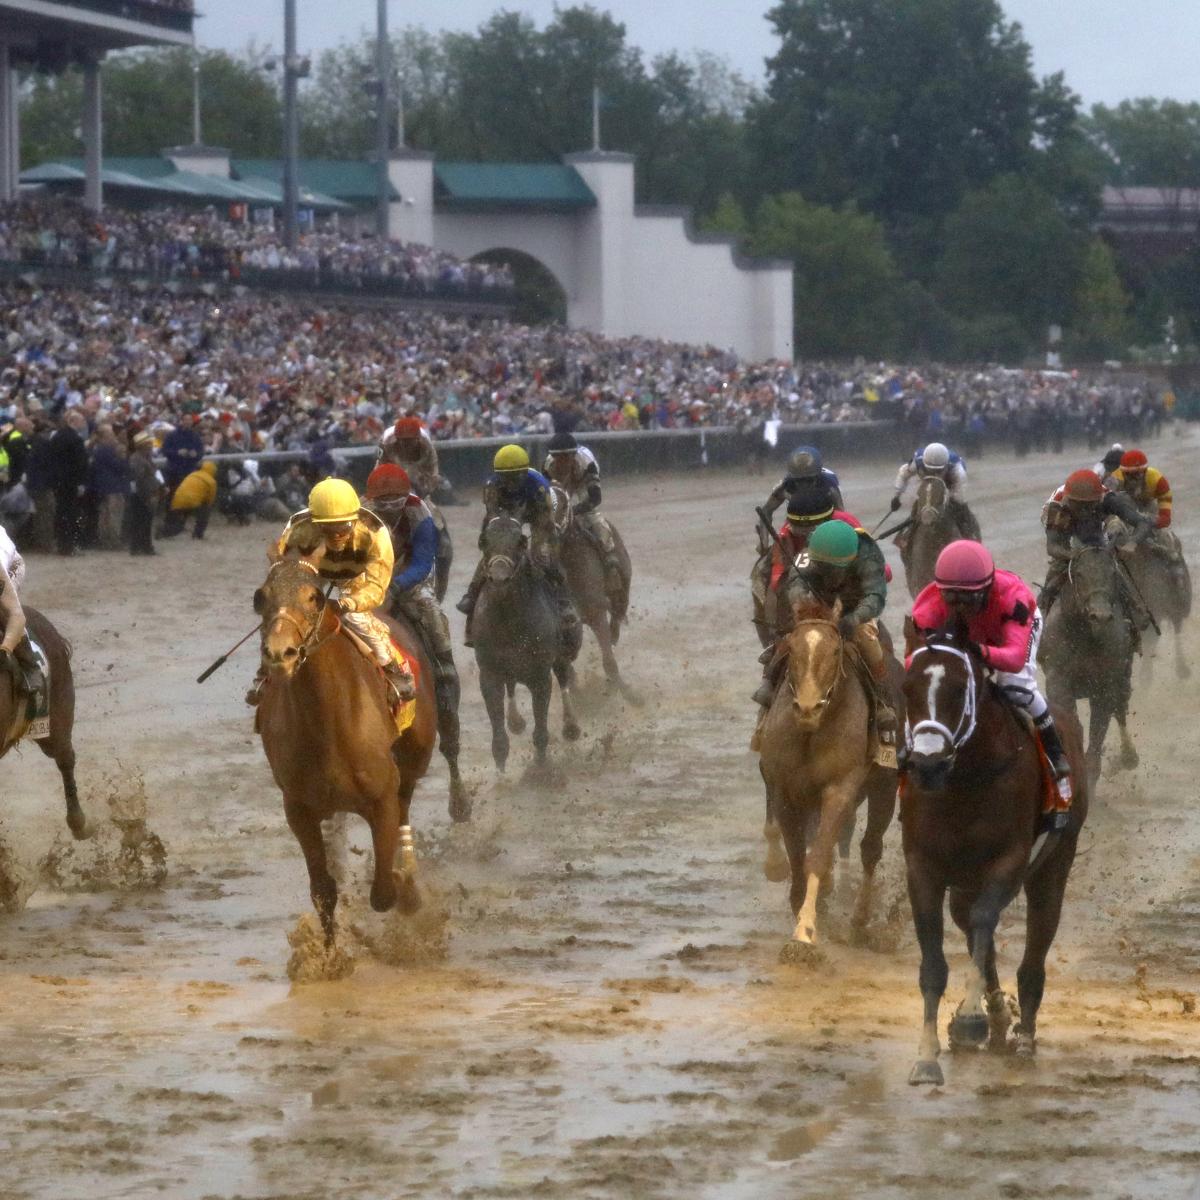 Kentucky Derby 2020 Post Positions Draw Start Time, Horses Lineup and